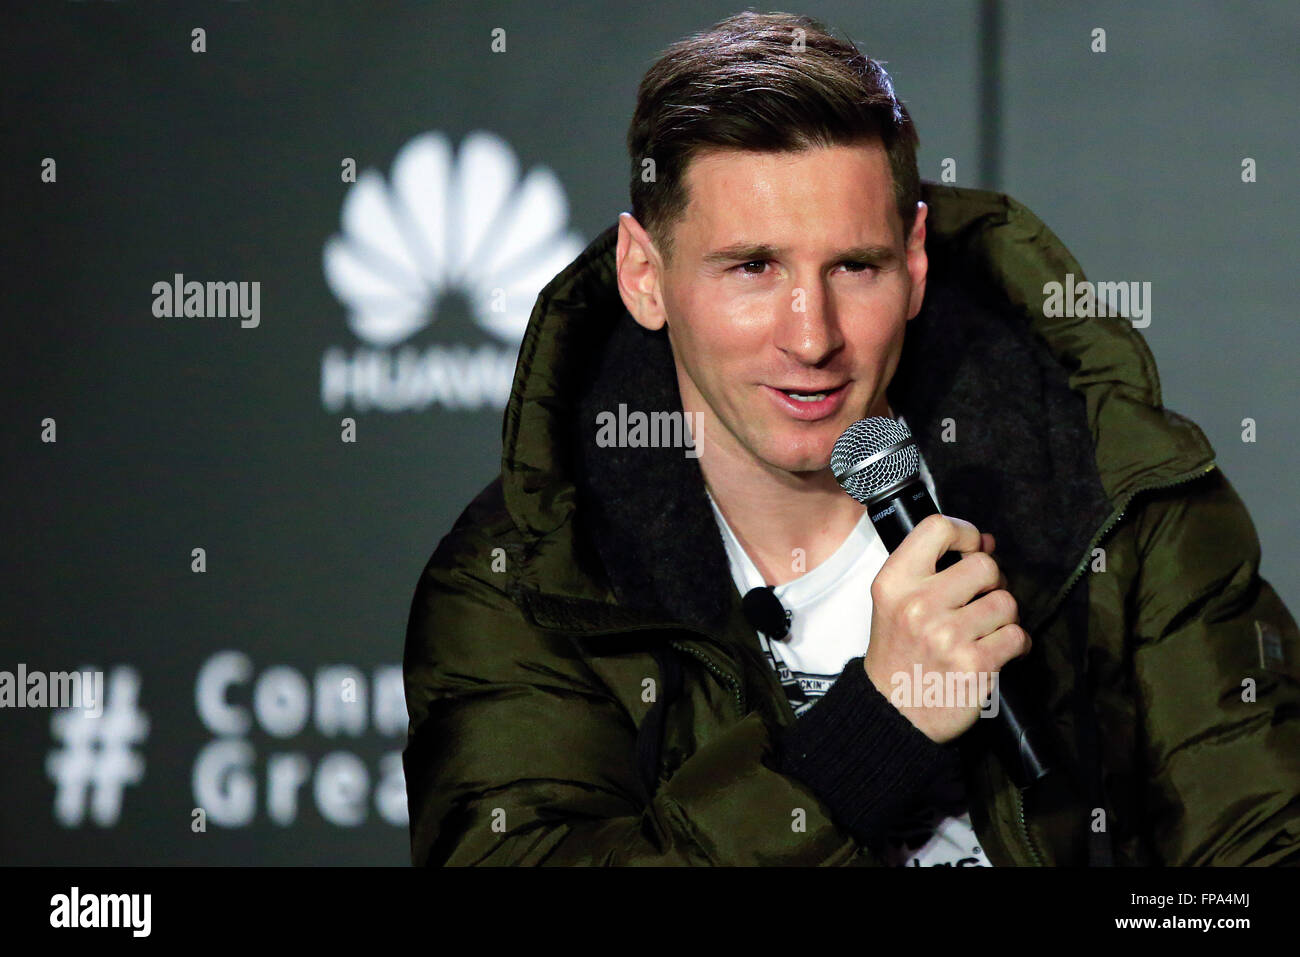 Barcelona, Spain. 17th Mar, 2016. FC Barcelona's Argentinian forward Lionel Messi attends a press conference in which Huawei announces Messi's appointment as the company's latest Global Brand Ambassador in Barcelona, Spain, March 17, 2016. © Pau Barrena/Xinhua/Alamy Live News Stock Photo